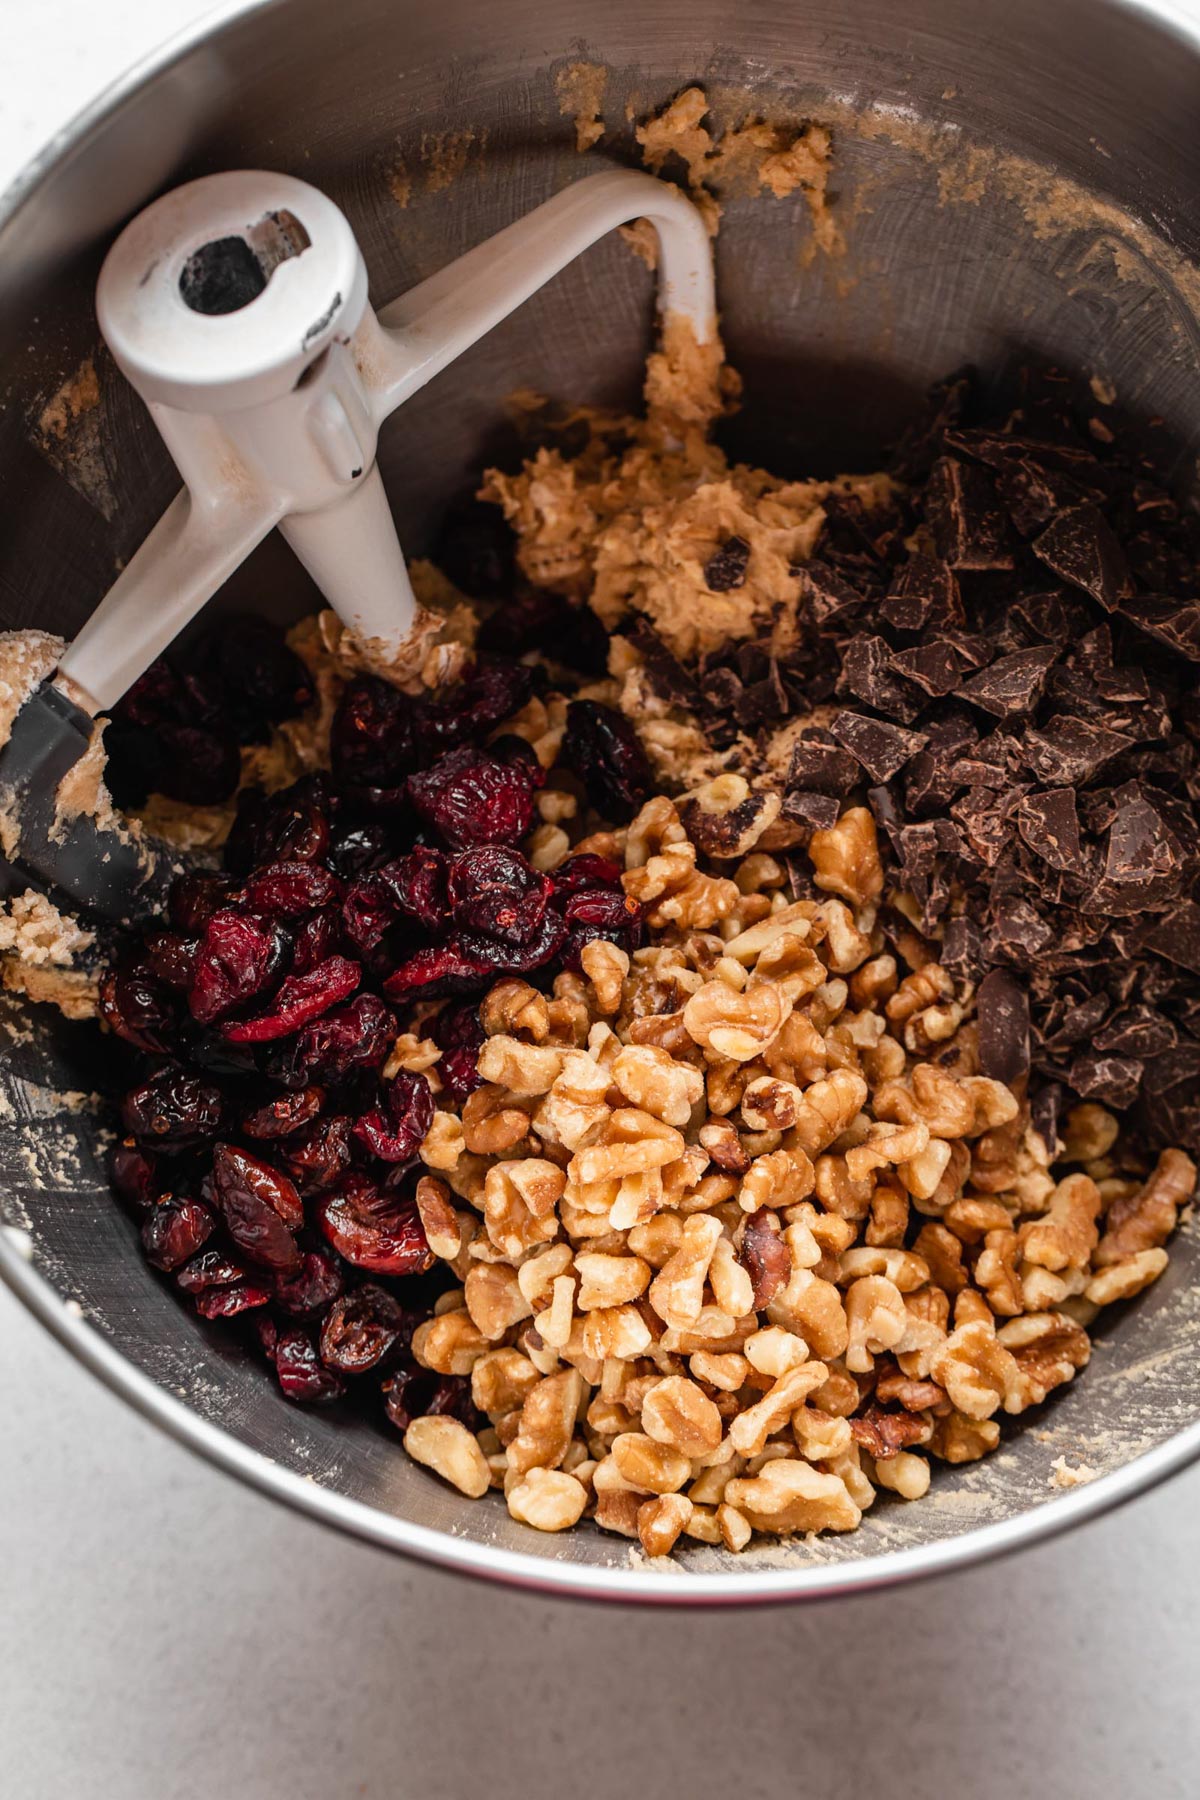 Cranberries, walnuts, and chocolate being added to oatmeal cookie dough